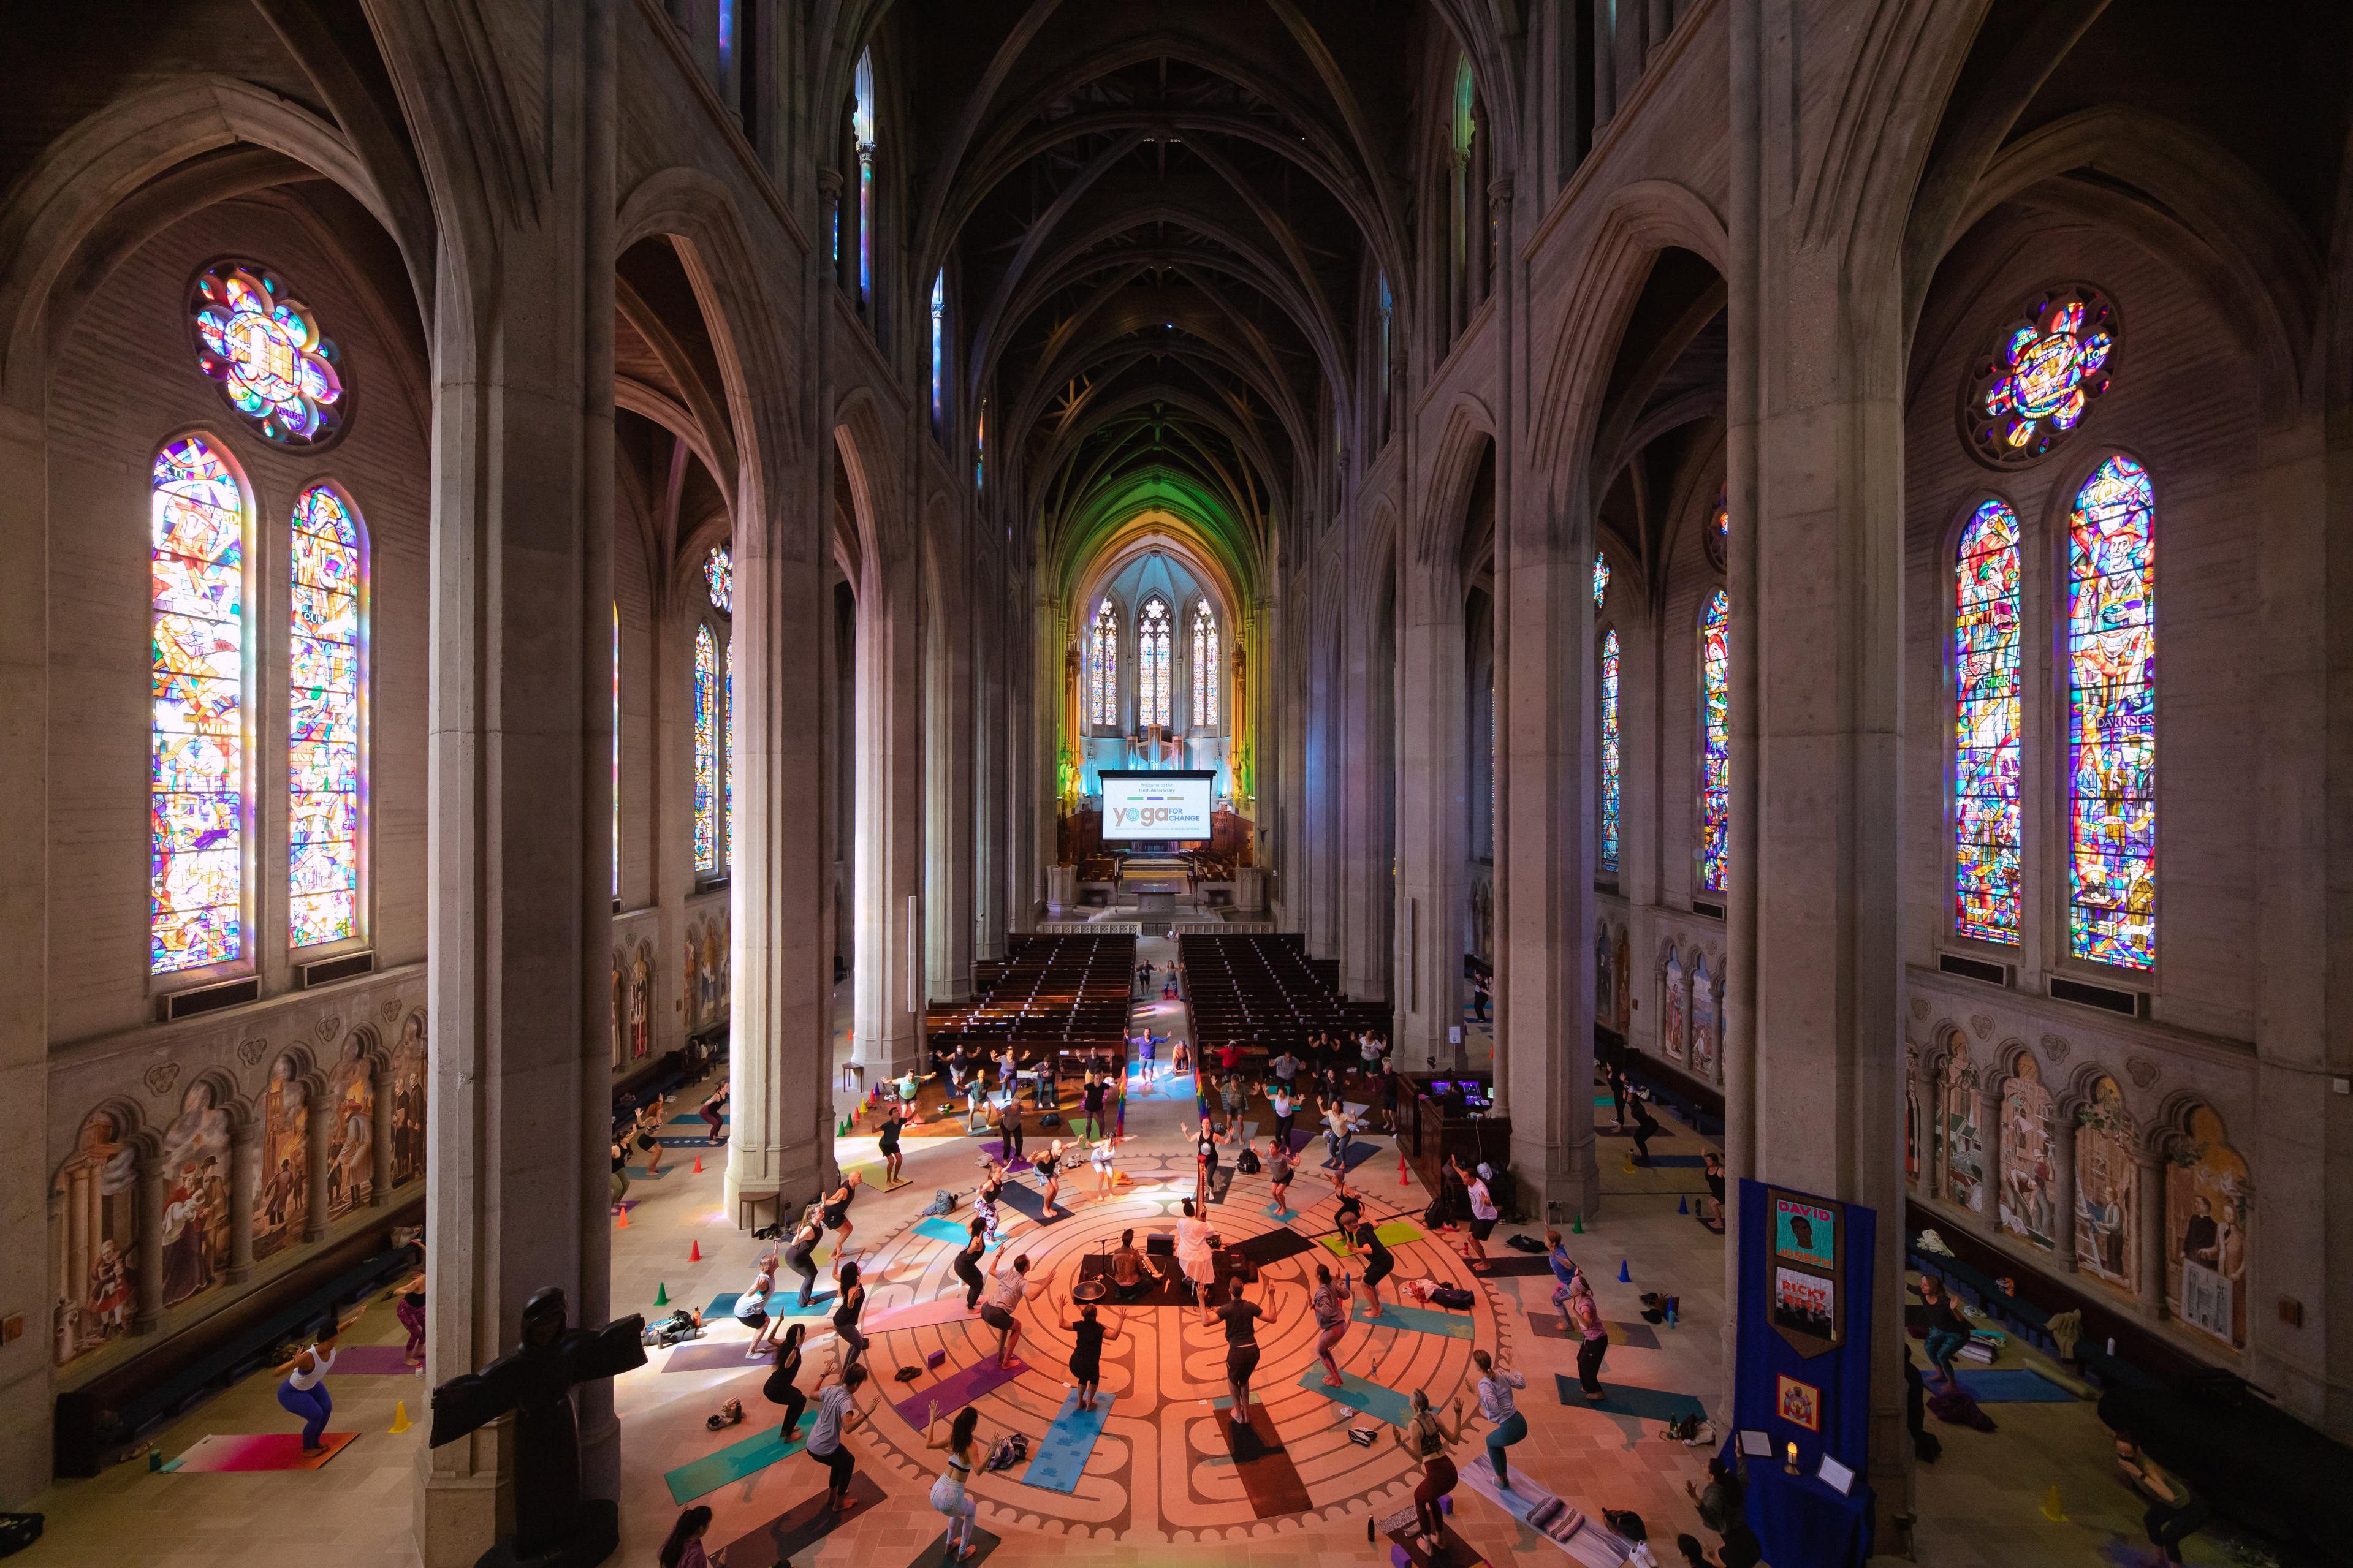 A yoga class inside a cathedral with high ceilings and vibrant stained glass windows.